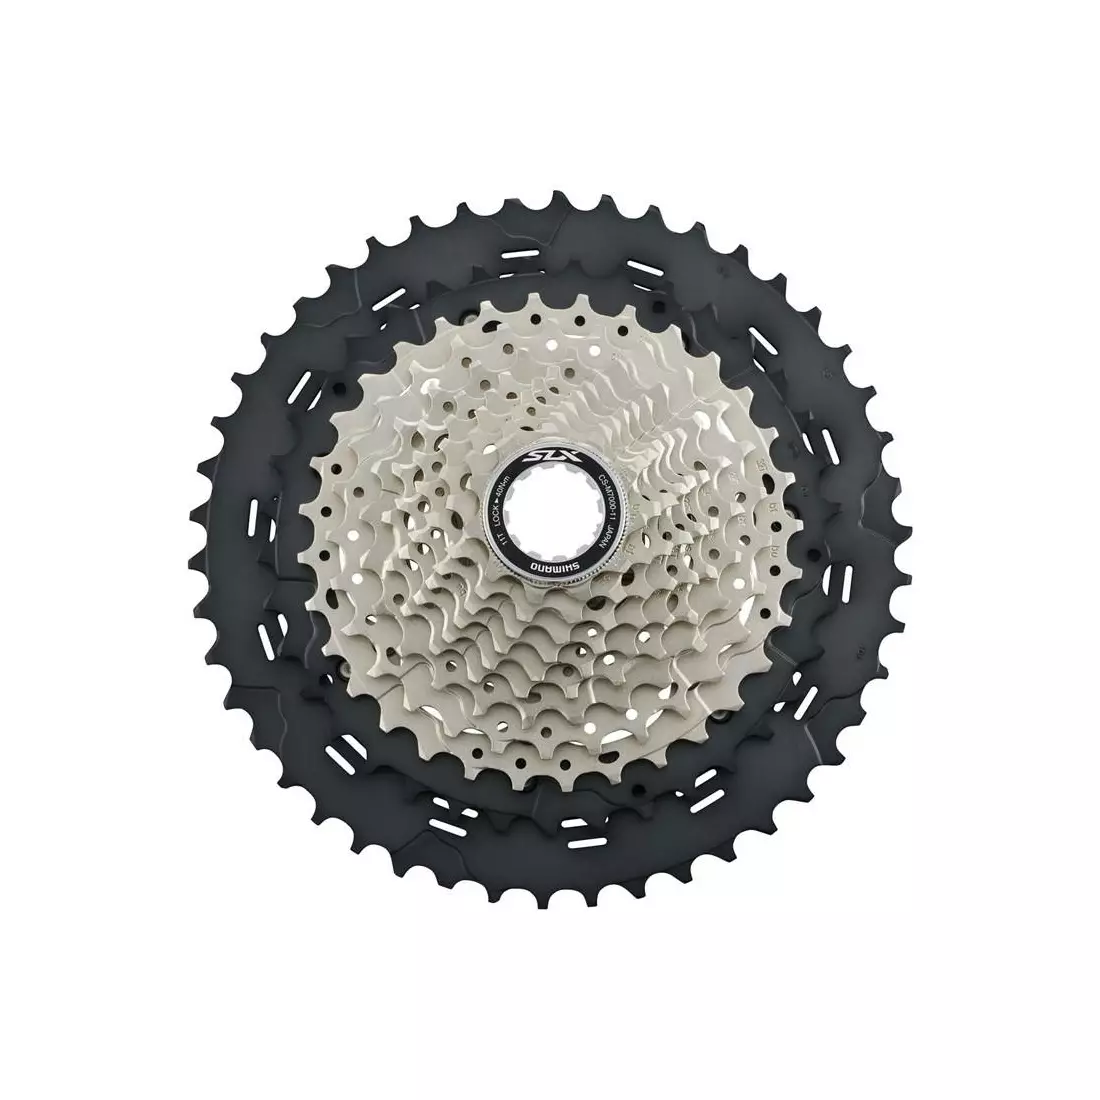 SHIMANO CS-M7000 bicycle cassette 11-speed 11-46T